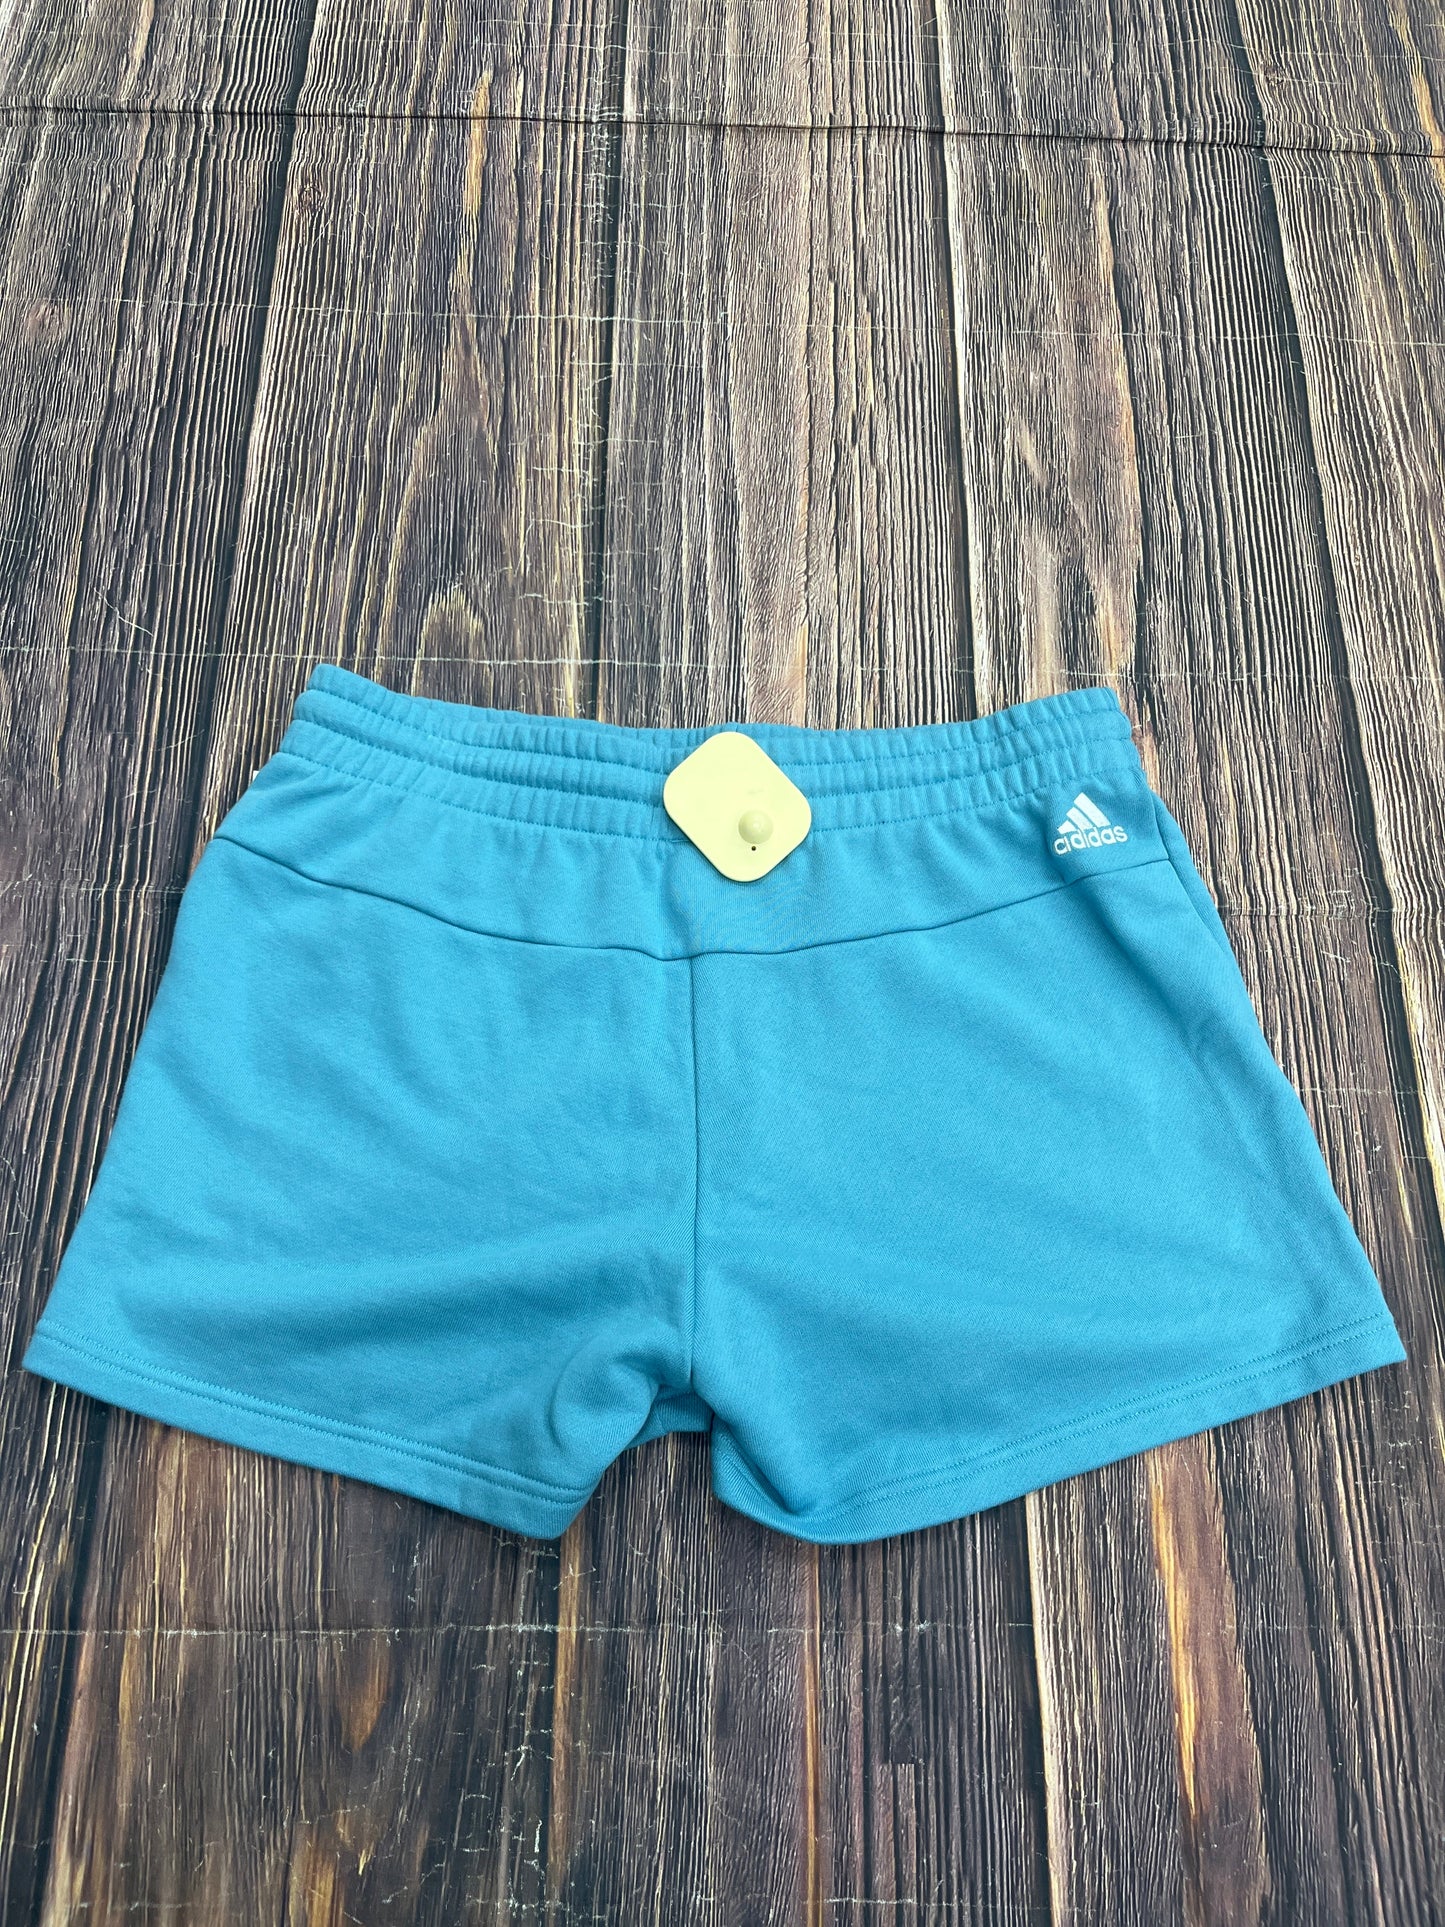 Shorts By Adidas  Size: L